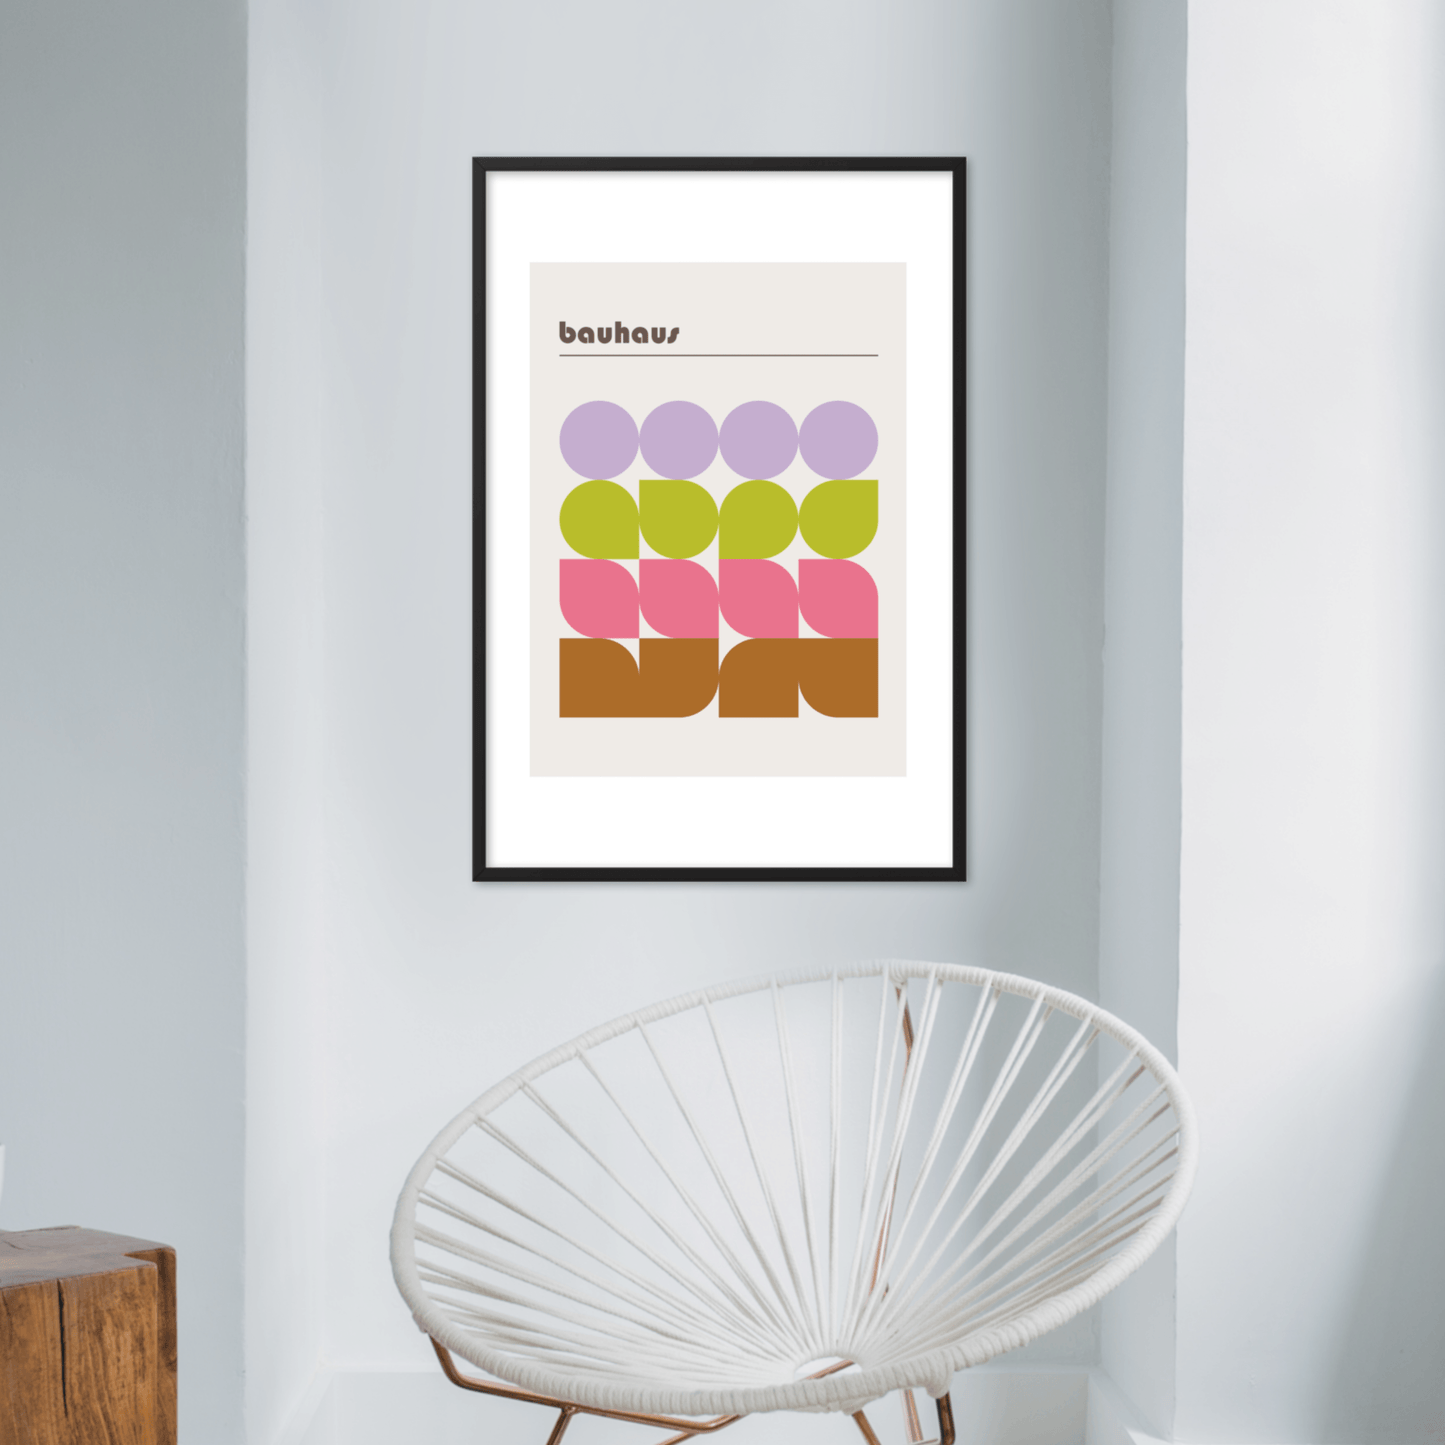 Bauhaus Abstract Exhibition, Poster - THE WALL SNOB